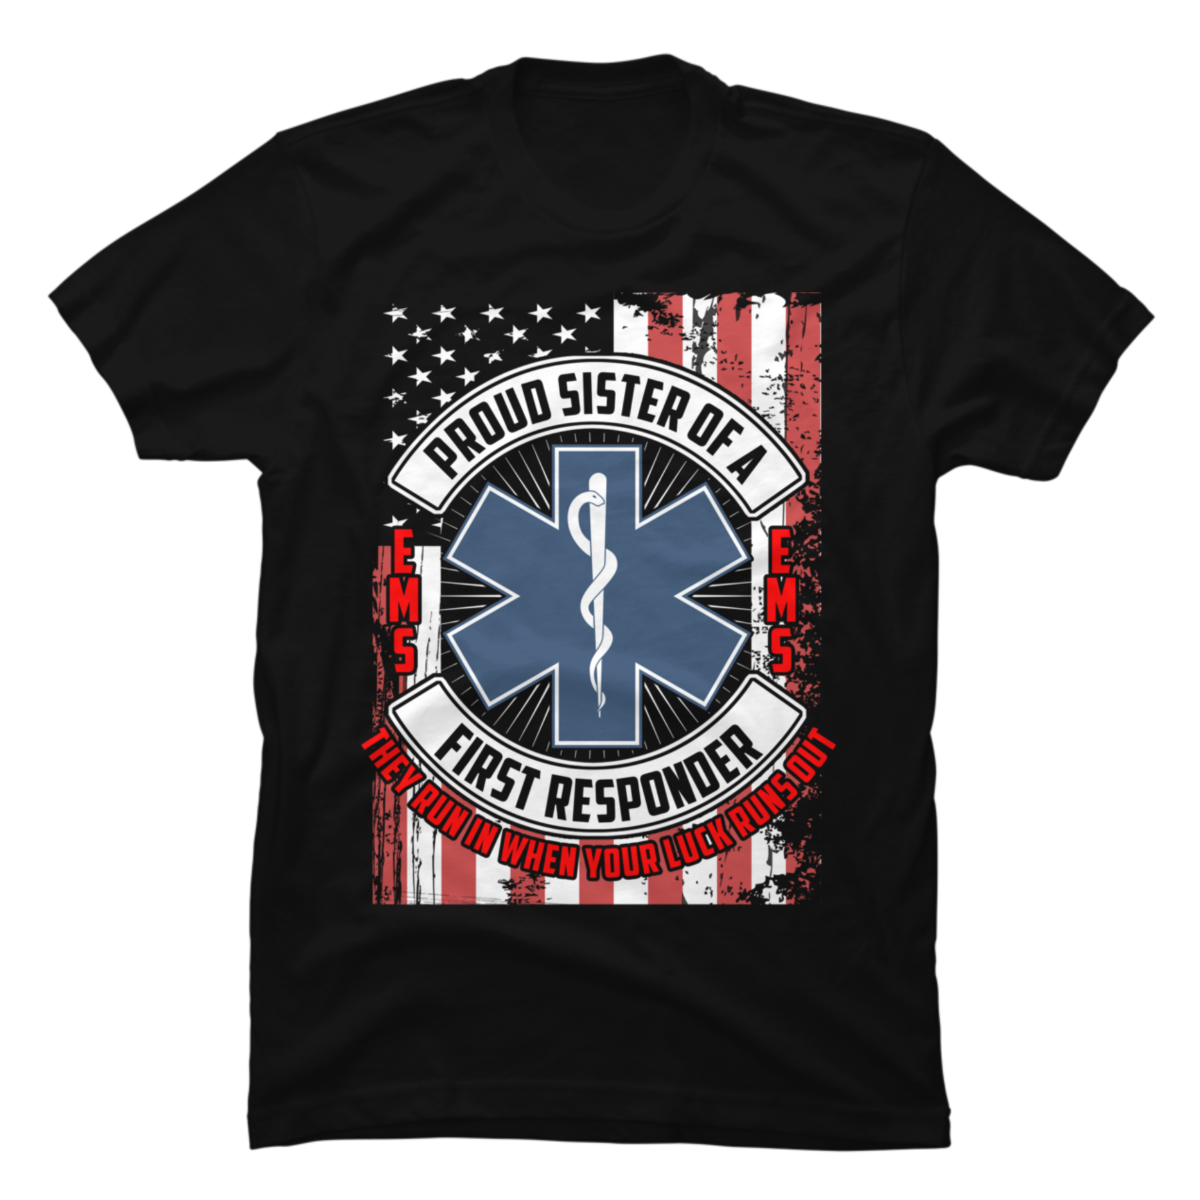 Proud sister of a first responder - Buy t-shirt designs